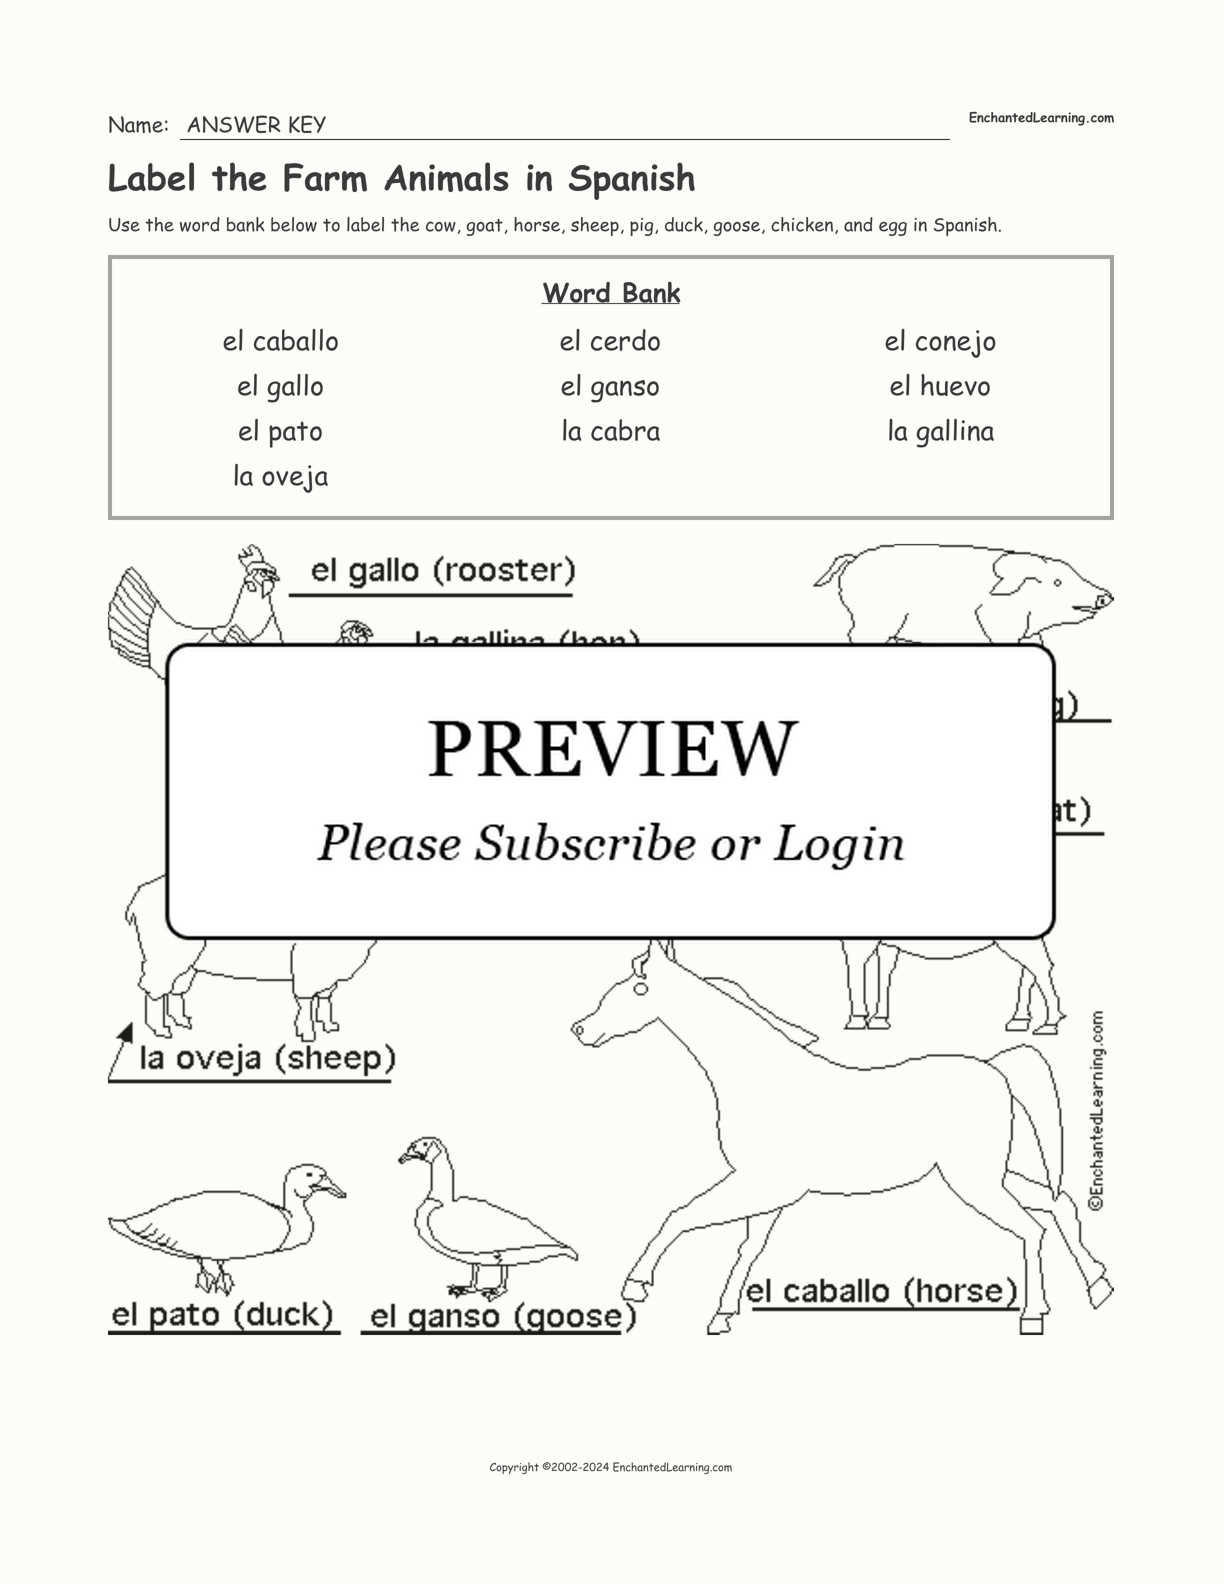 Label the Farm Animals in Spanish interactive worksheet page 2